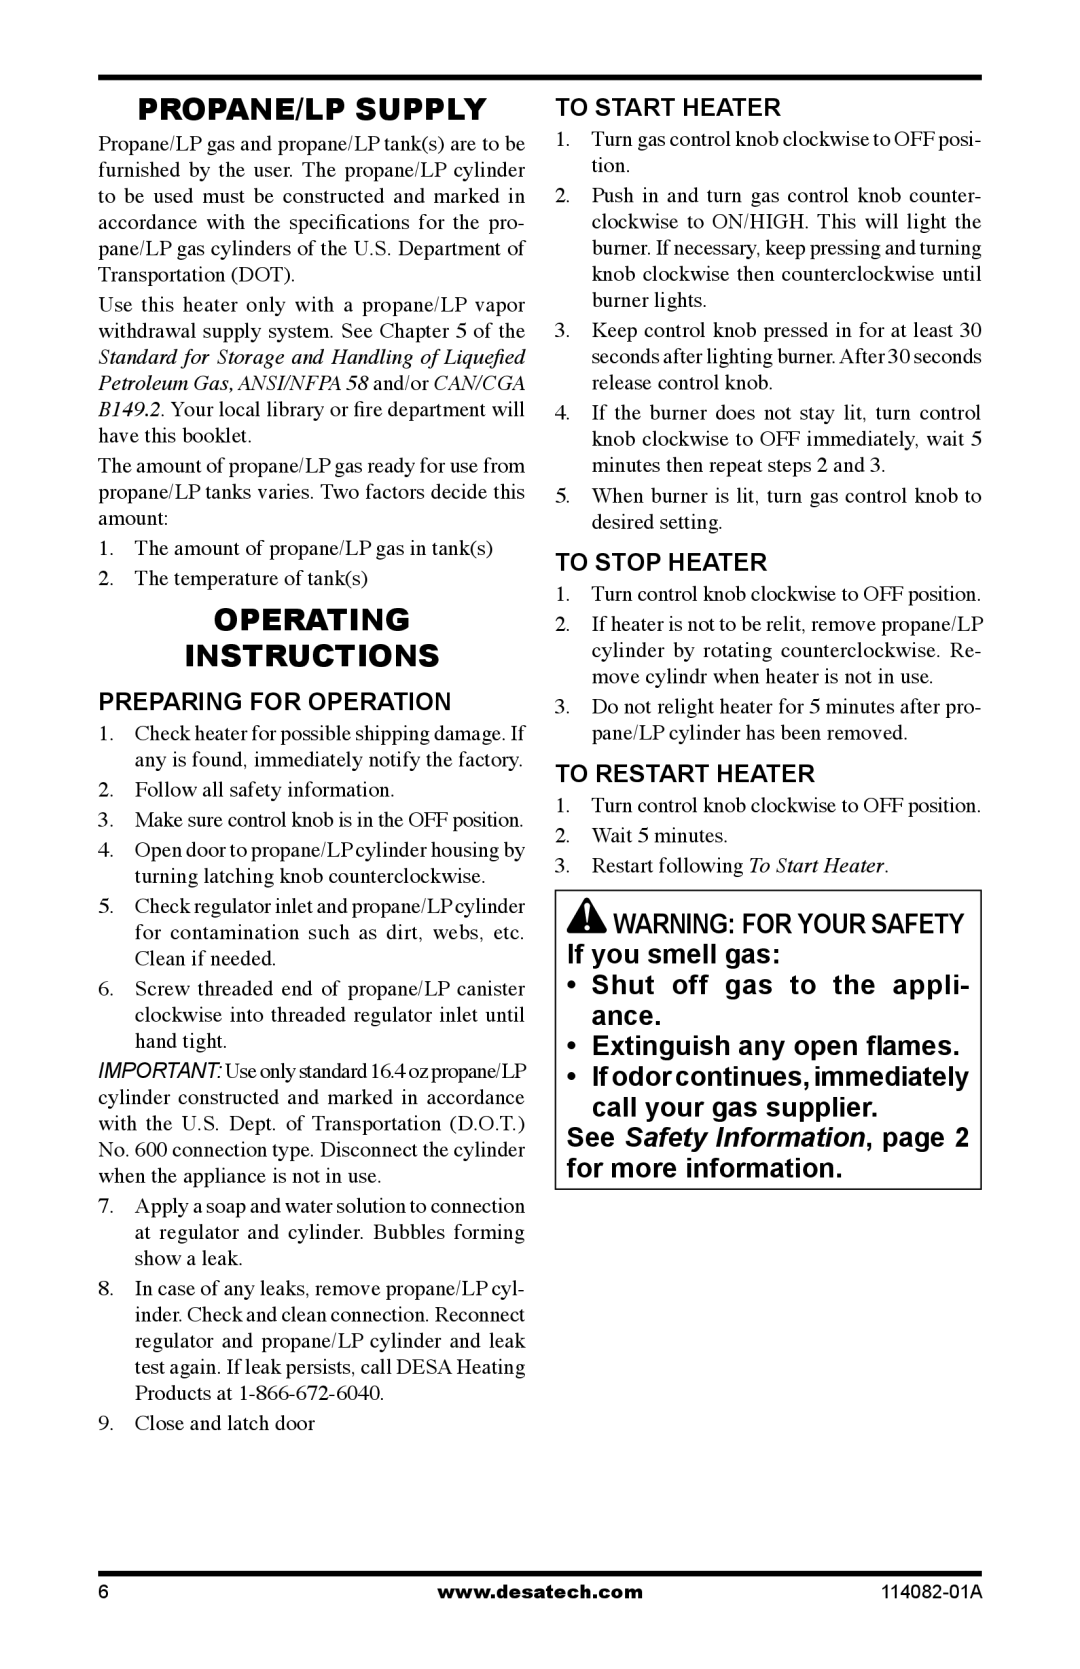 Desa SPC-21PHTSA Propane/Lp Supply, Operating Instructions, WARNING FOR YOUR SAFETY If you smell gas, To Start Heater 